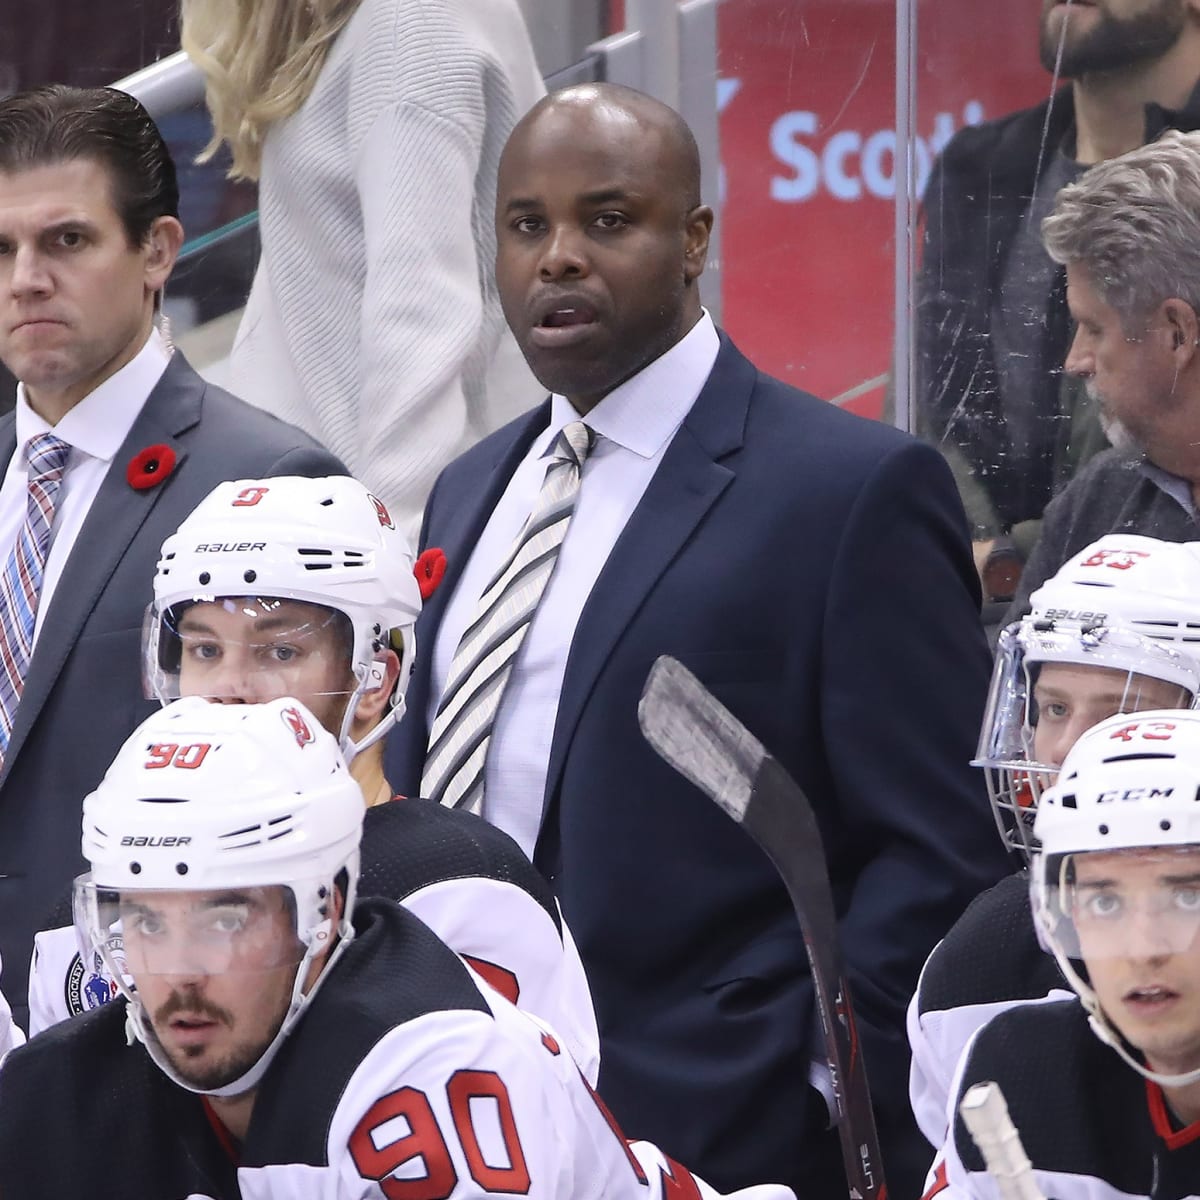 The face of hockey is changing': A roundtable on Mike Grier's